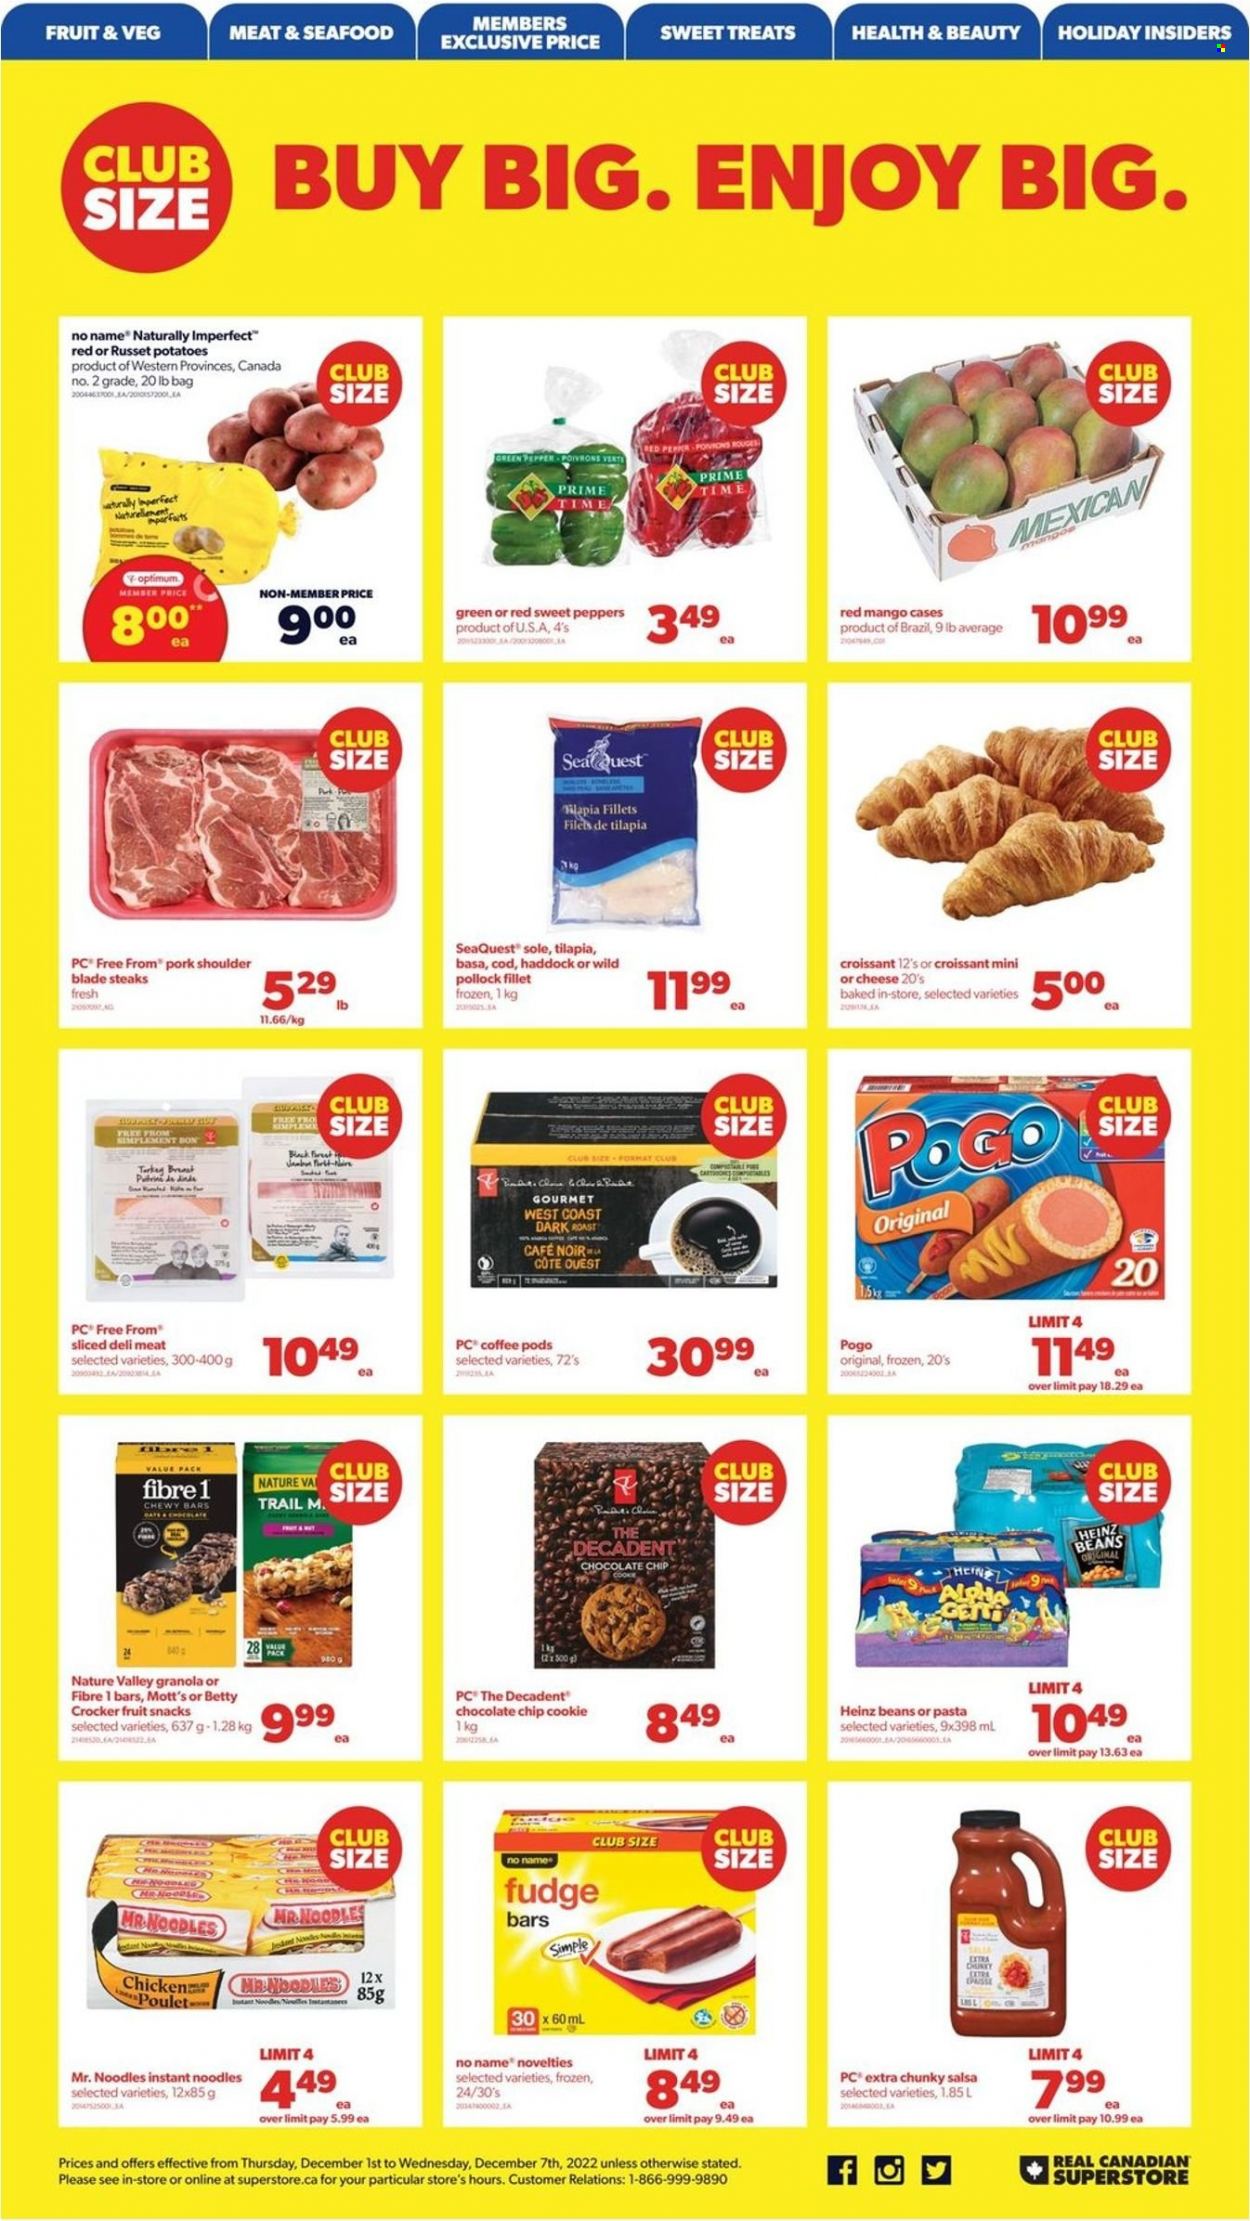 thumbnail - Real Canadian Superstore Flyer - December 01, 2022 - December 07, 2022 - Sales products - croissant, russet potatoes, sweet peppers, potatoes, peppers, green pepper, mango, Mott's, cod, tilapia, haddock, pollock, seafood, No Name, instant noodles, noodles, fudge, fruit snack, Nature Valley, salsa, coffee, coffee pods, turkey breast, turkey, pork meat, pork shoulder, book, Optimum, granola, Heinz, steak. Page 11.